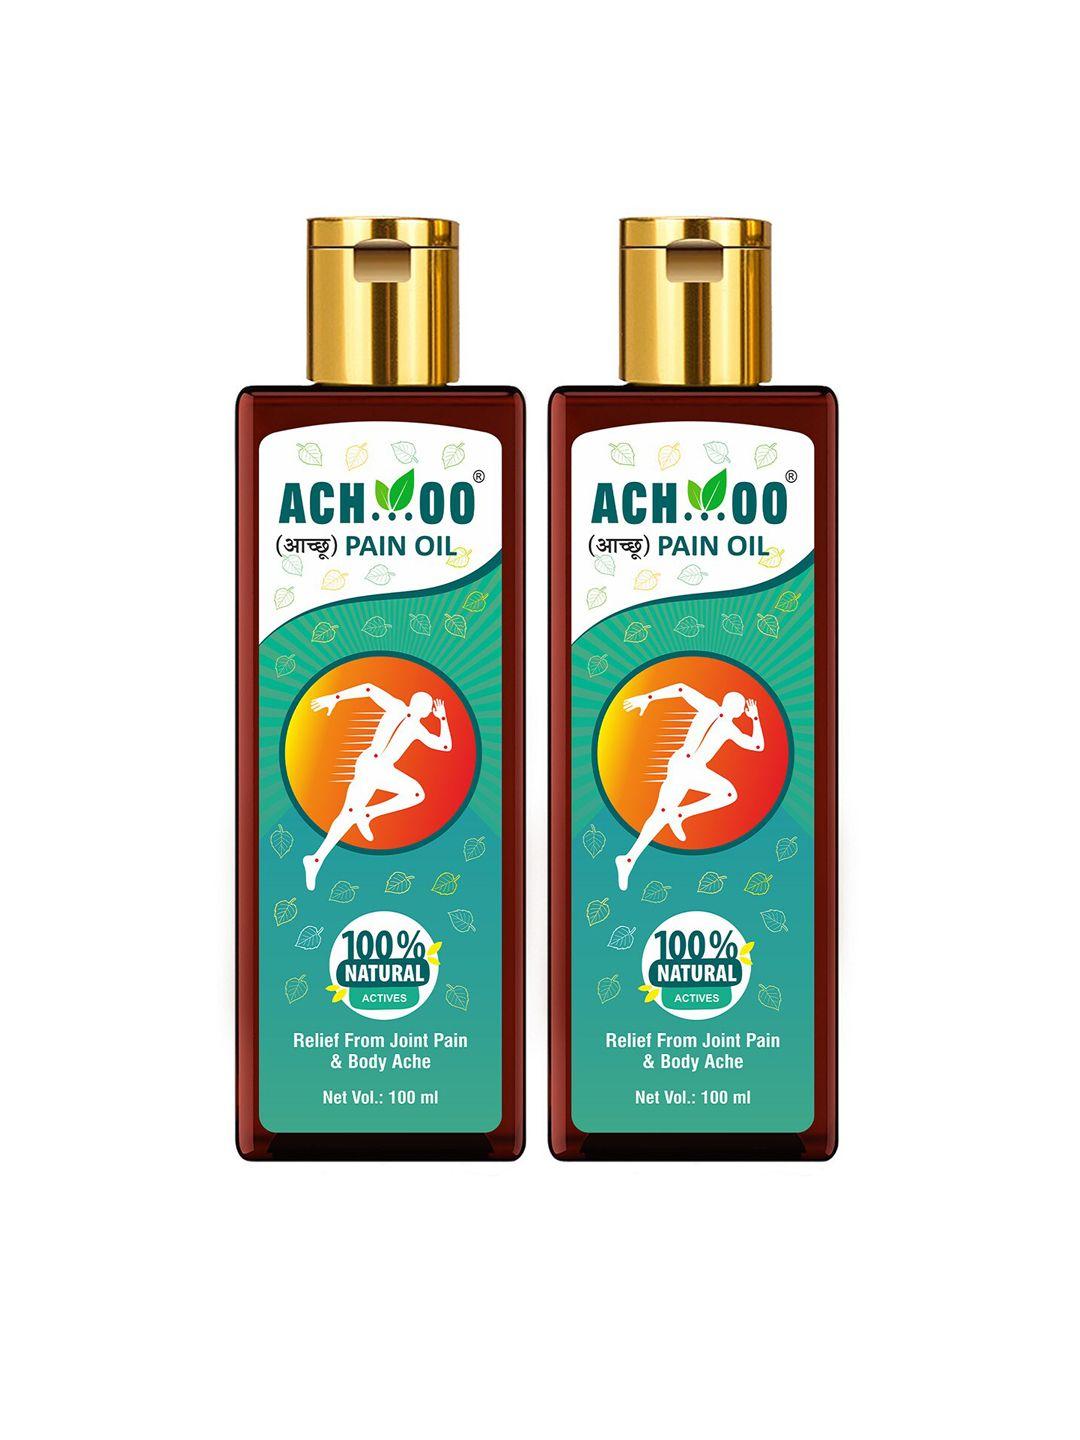 achoo set of 2 pain oil to relief from joint pains & body ache - 100 ml each